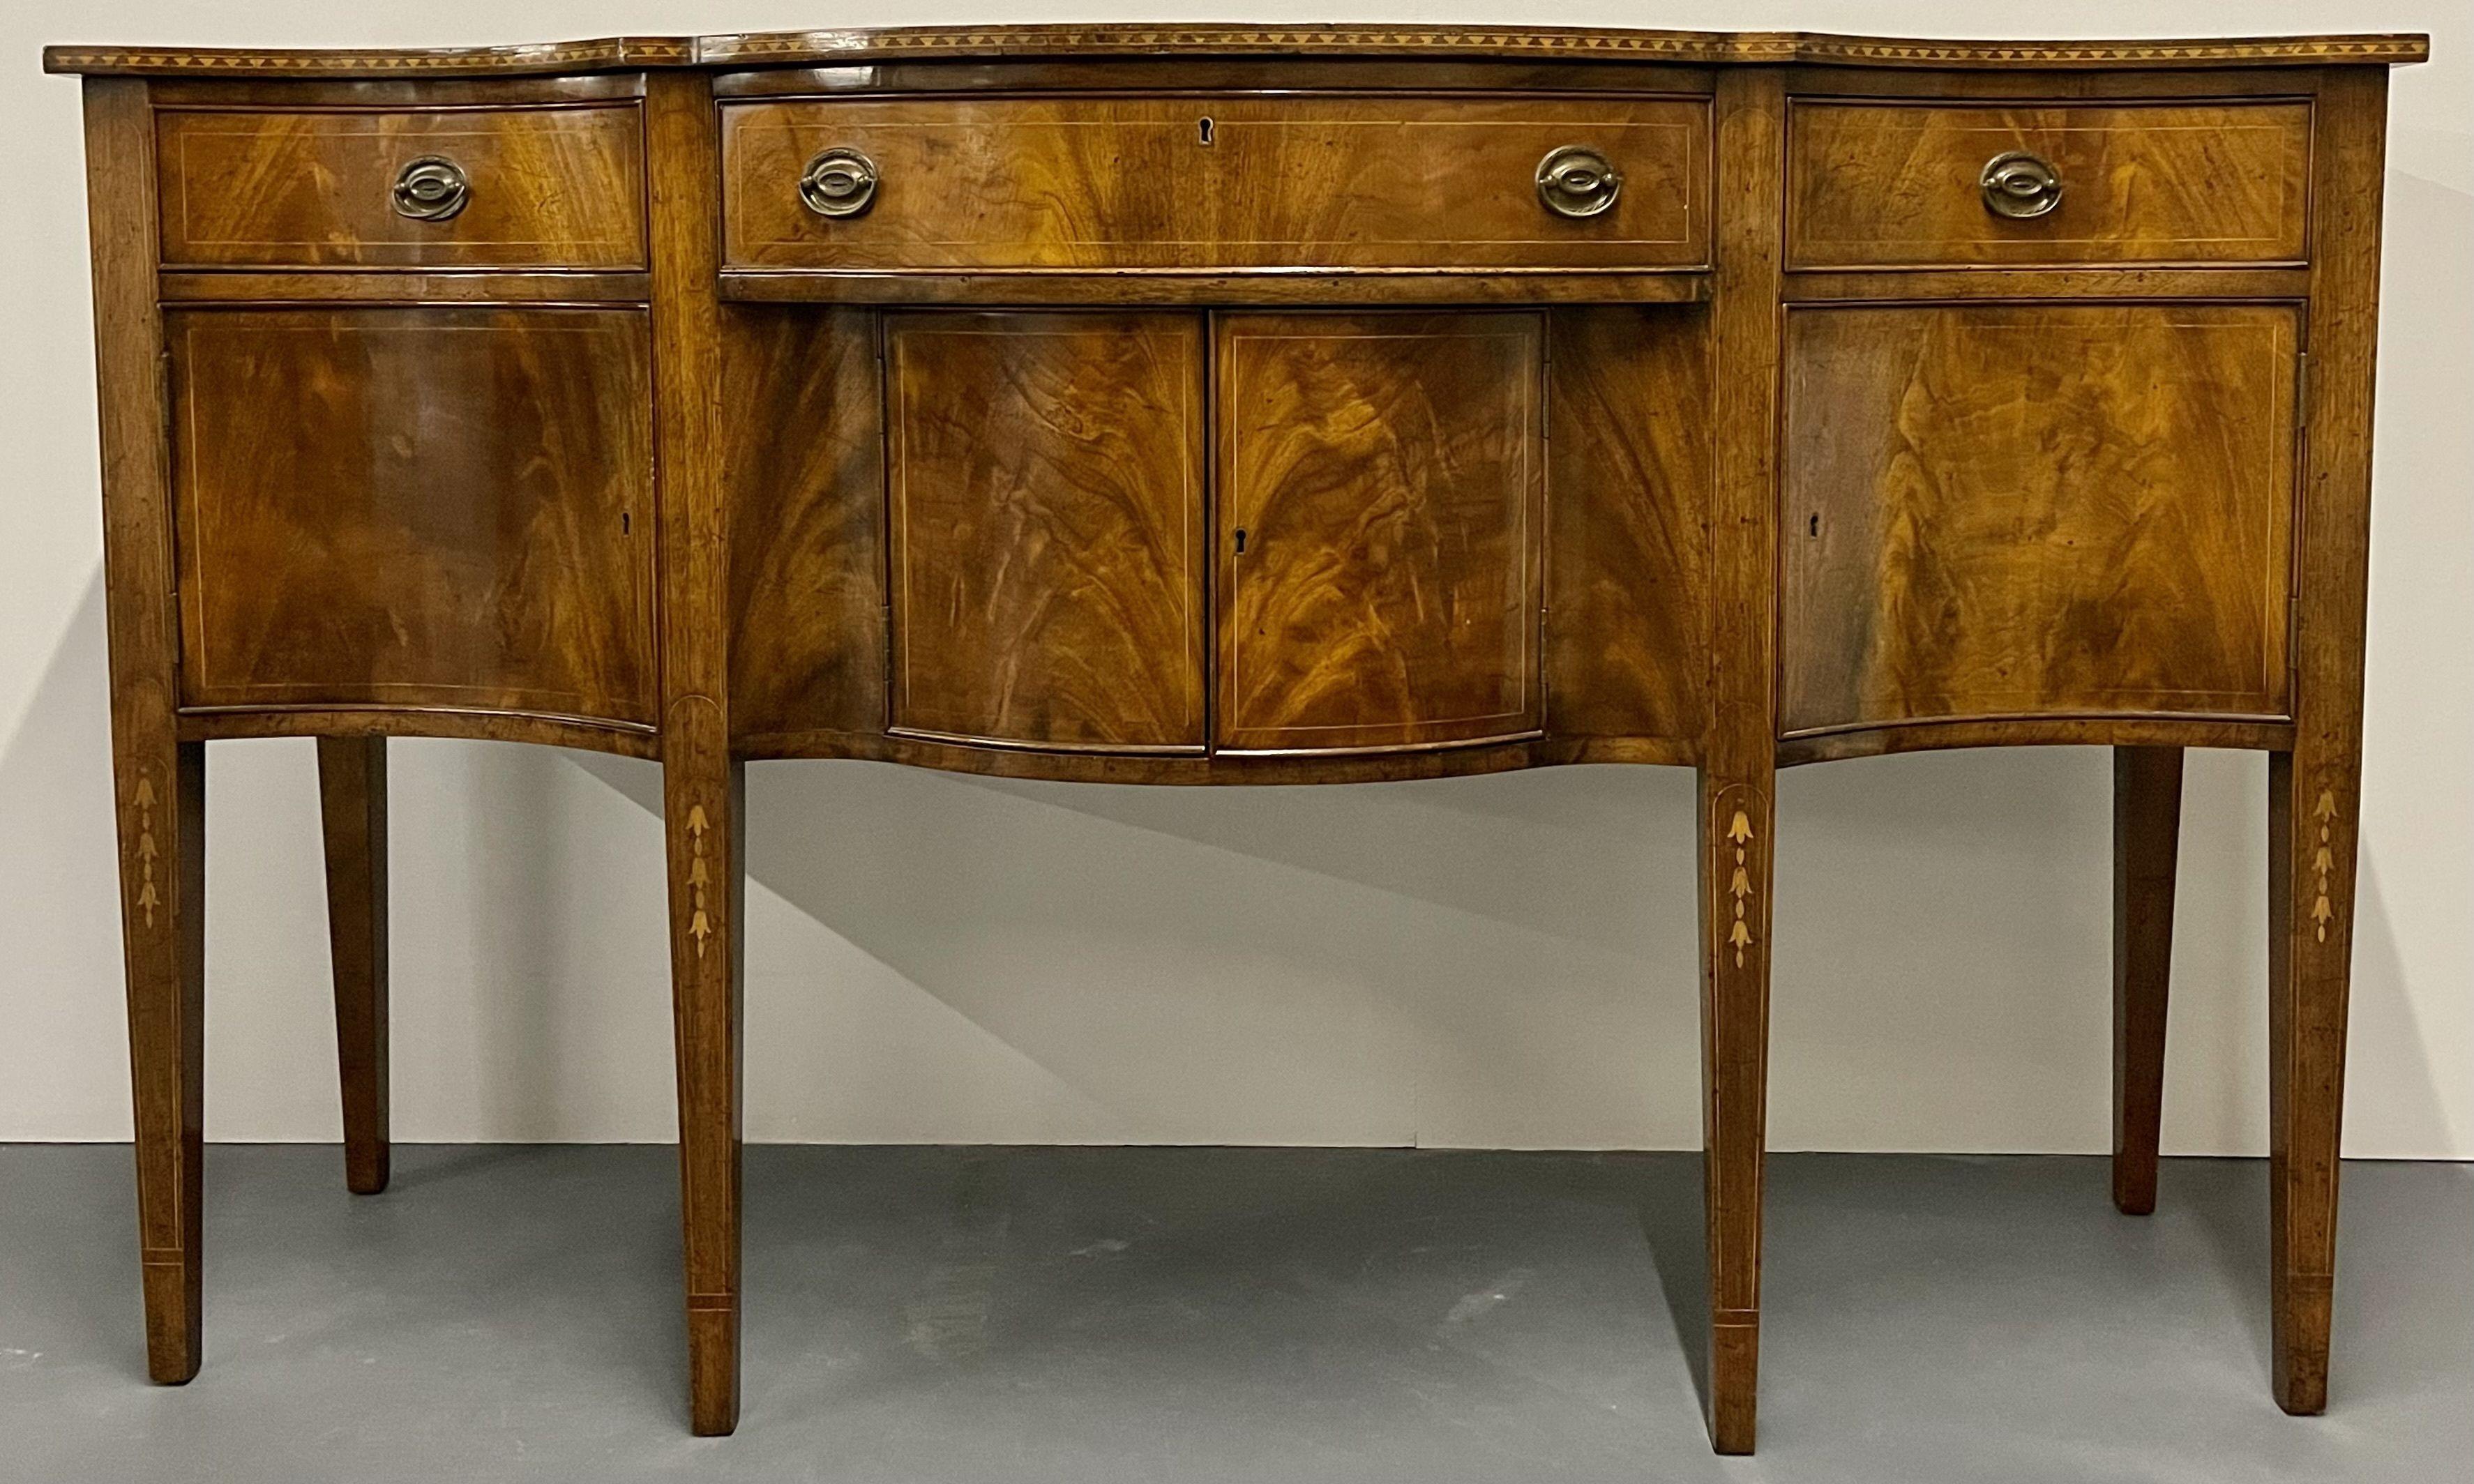 American Federal Sideboard, Credenza, Solid Flame Mahogany, Inlaid, Georgian Style